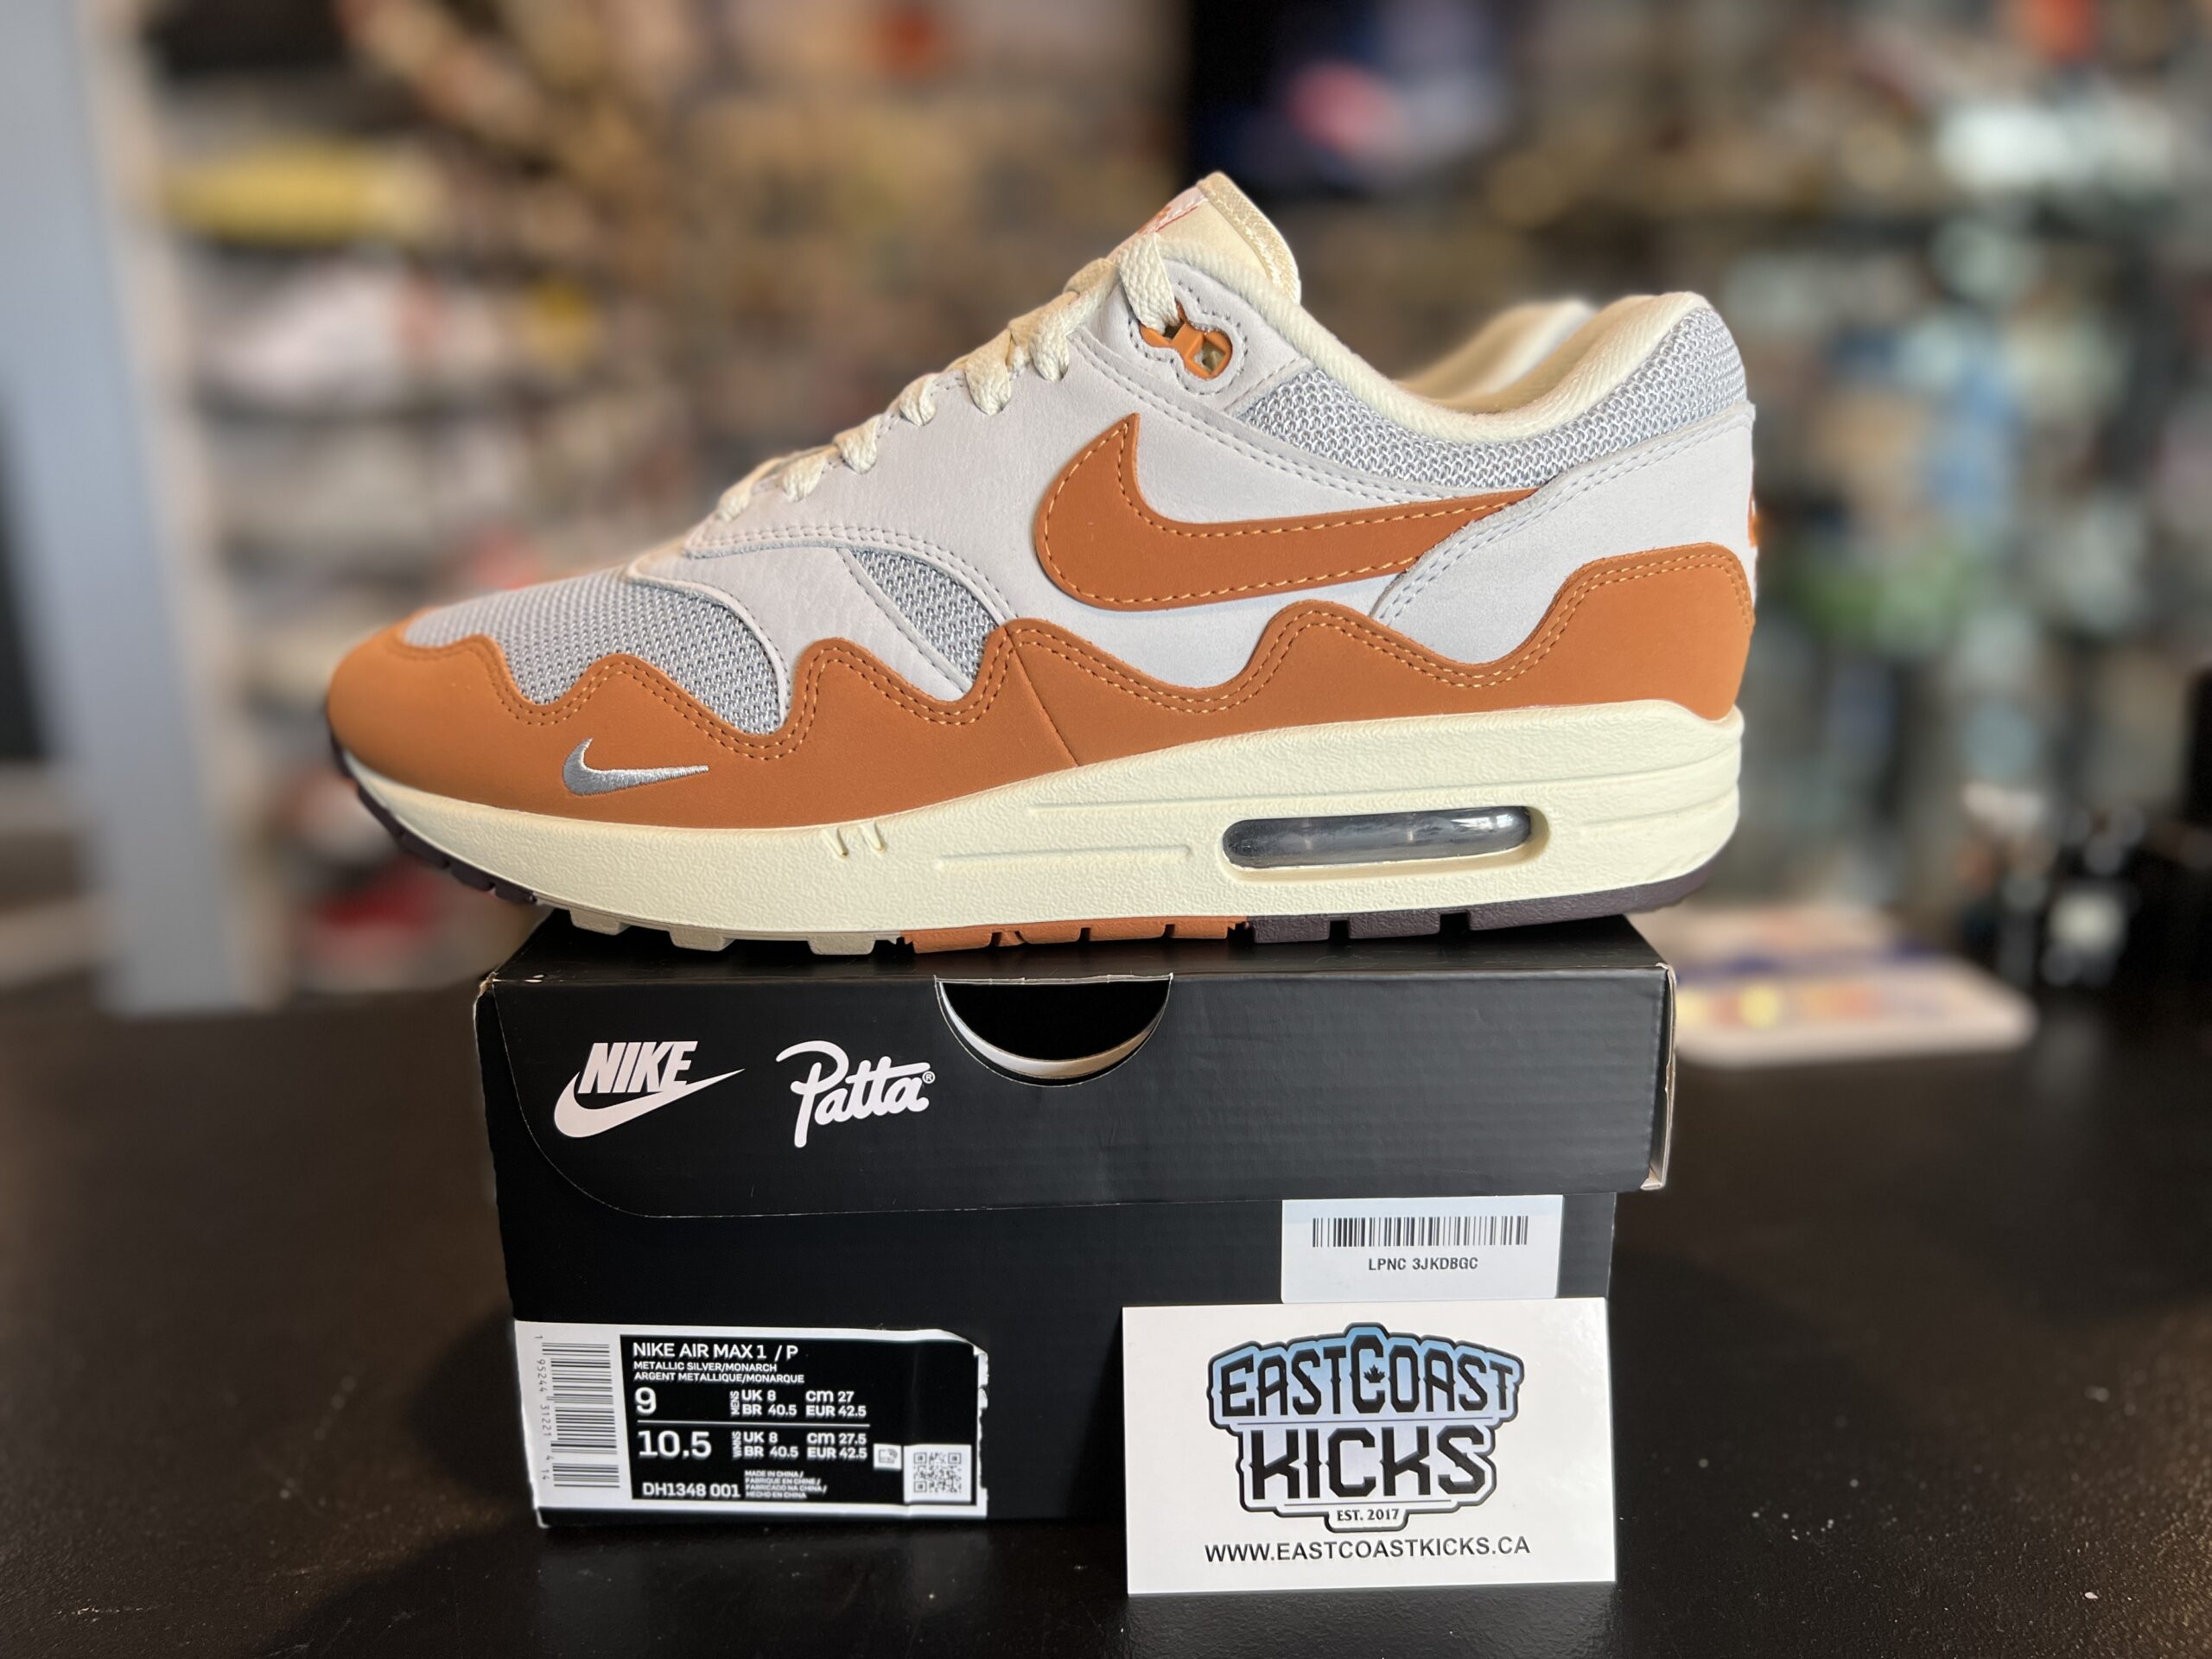 Preowned Nike Air Max 1 Patta Waves Monarch (with Bracelet) Size 9